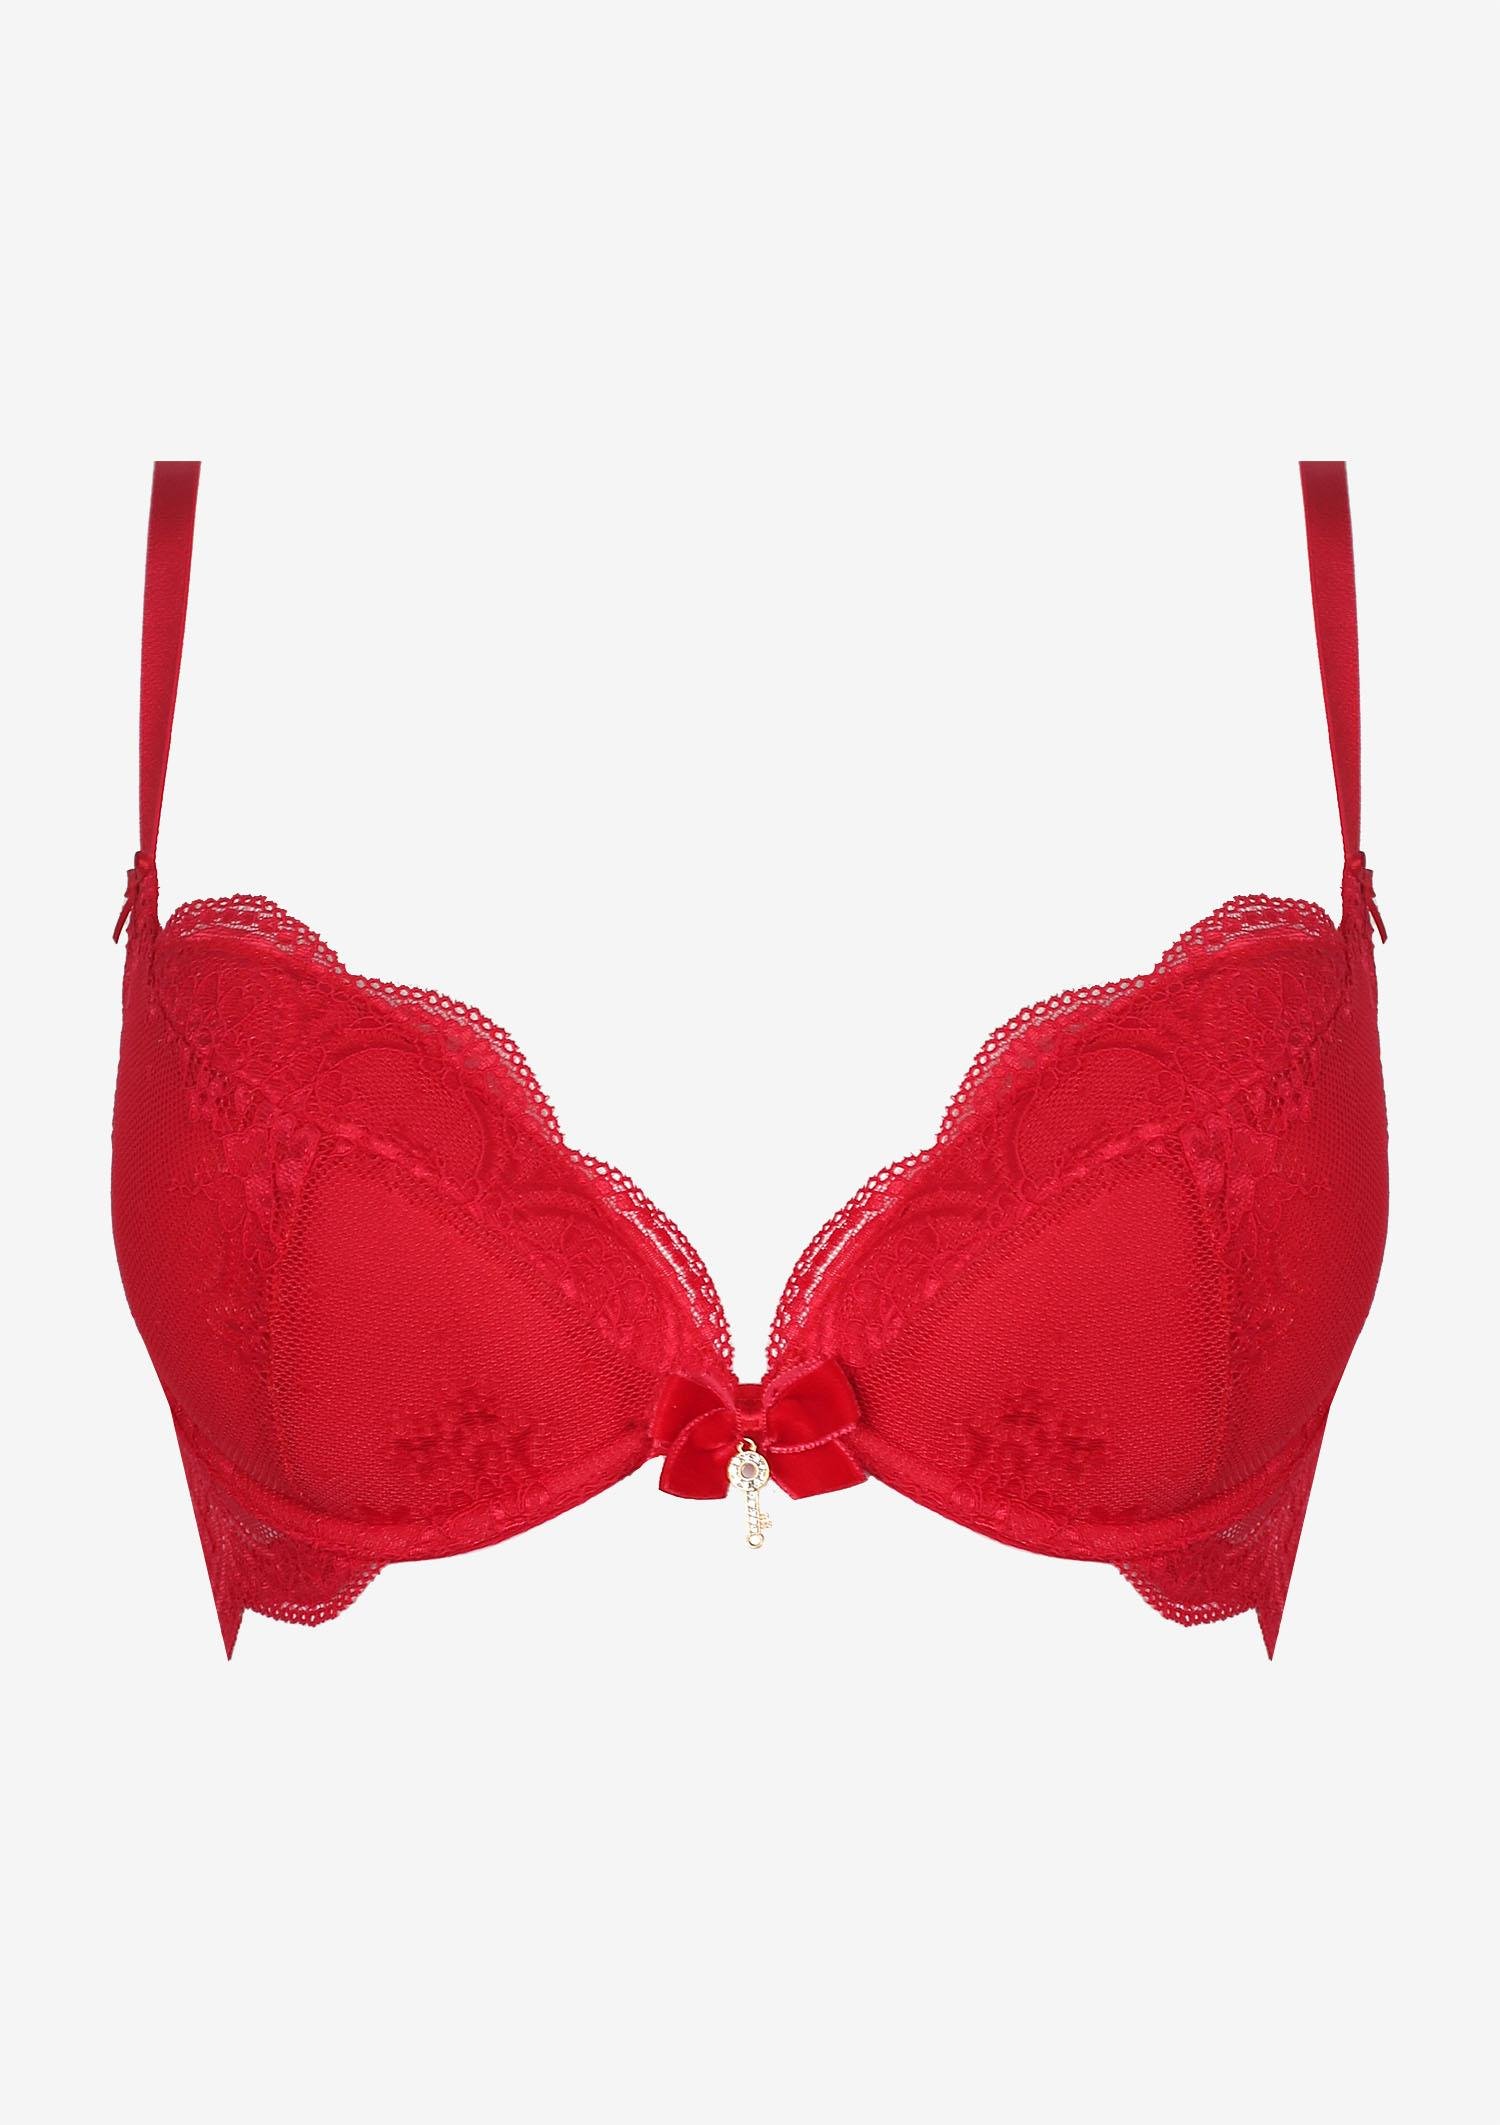 One More Night Poupee Marilyn's Lace Push-Up Bra